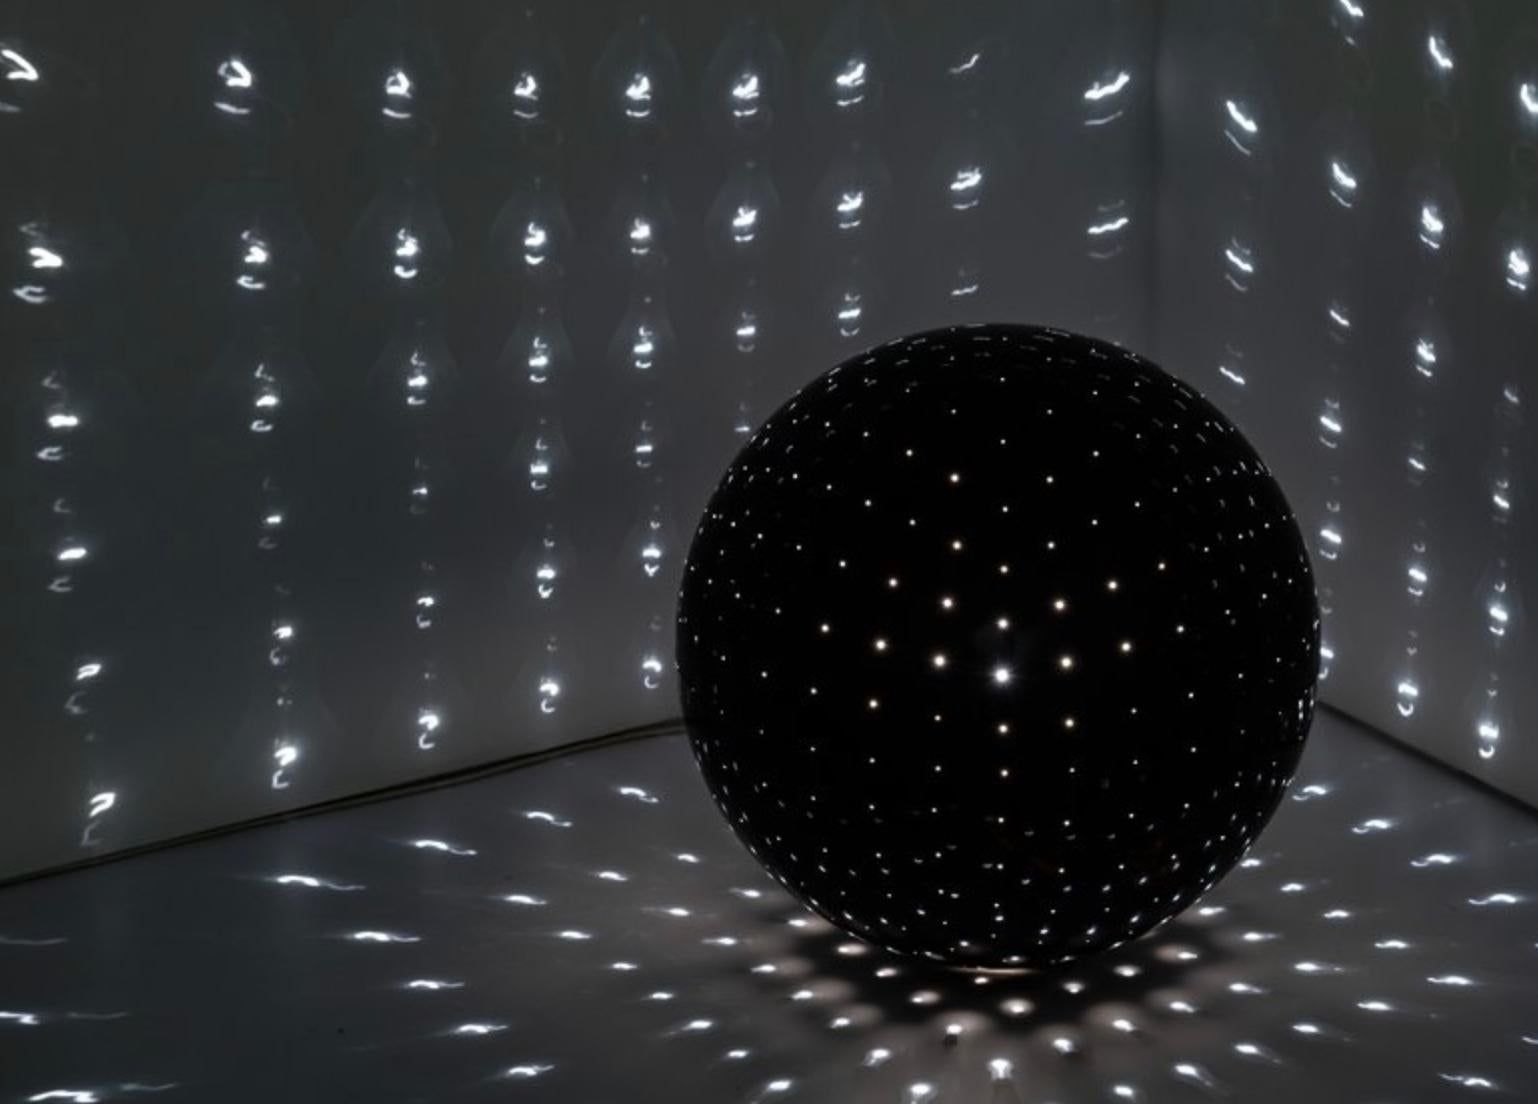 Bill Culbert (New Zealand, 1935-2019),
'Cubic Projections', 1968.
 
Exhibited by the Lisson Gallery, a plastic ball with pinholes all-over, radiating lights, this example from the original edition sold at the time of the exhibition.

Measure: